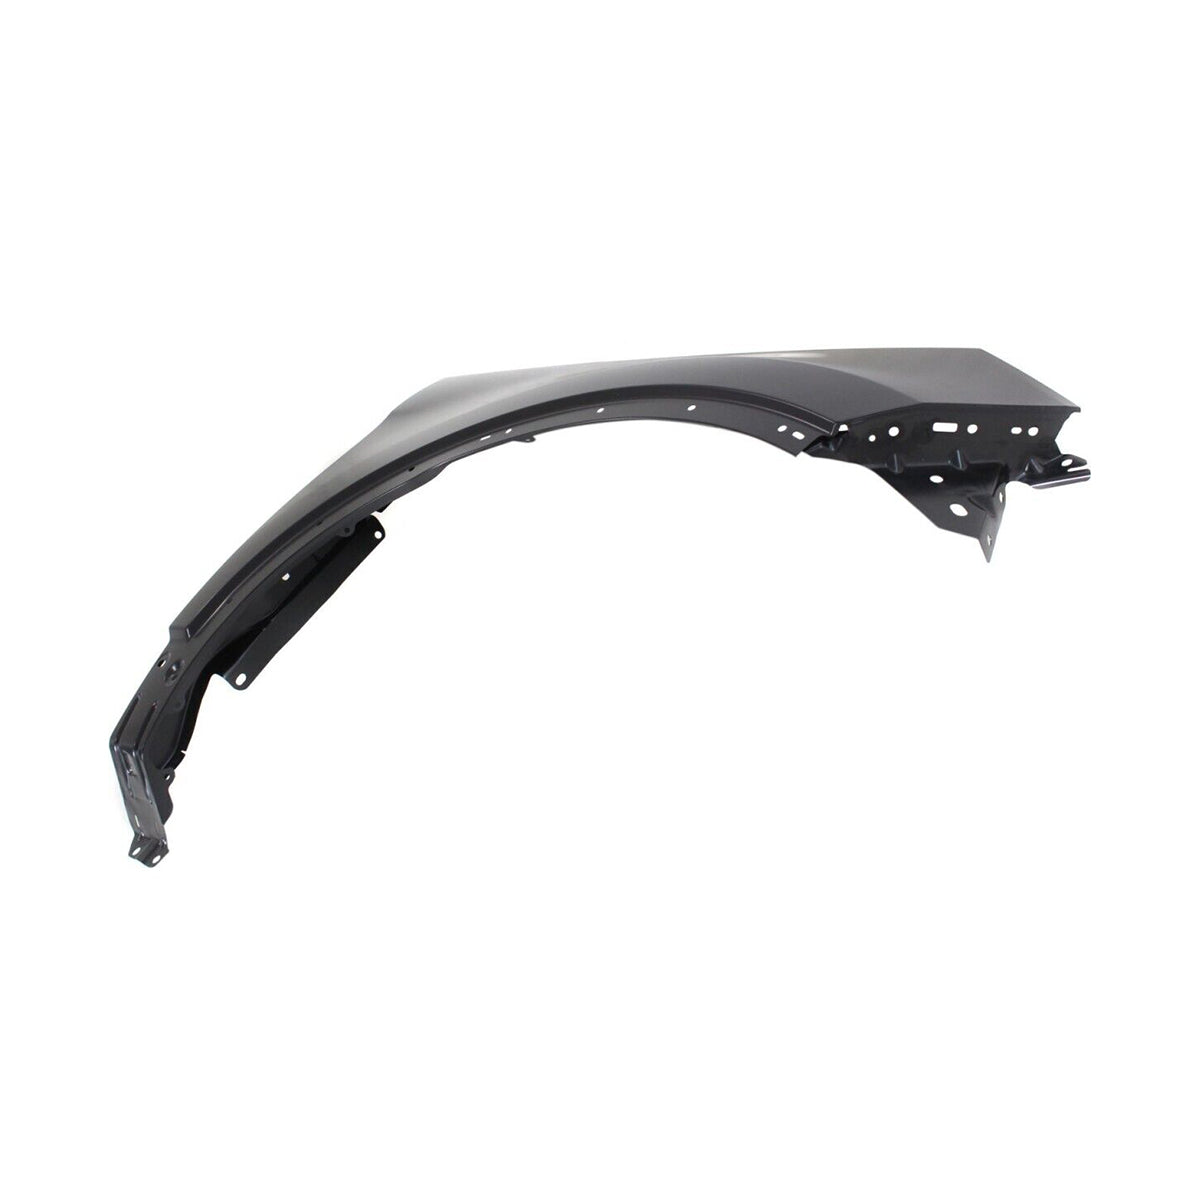 Replacement FRONT FENDER, RH, 2016-2019 Ford Explorer, FB5Z16005A, (Steel)